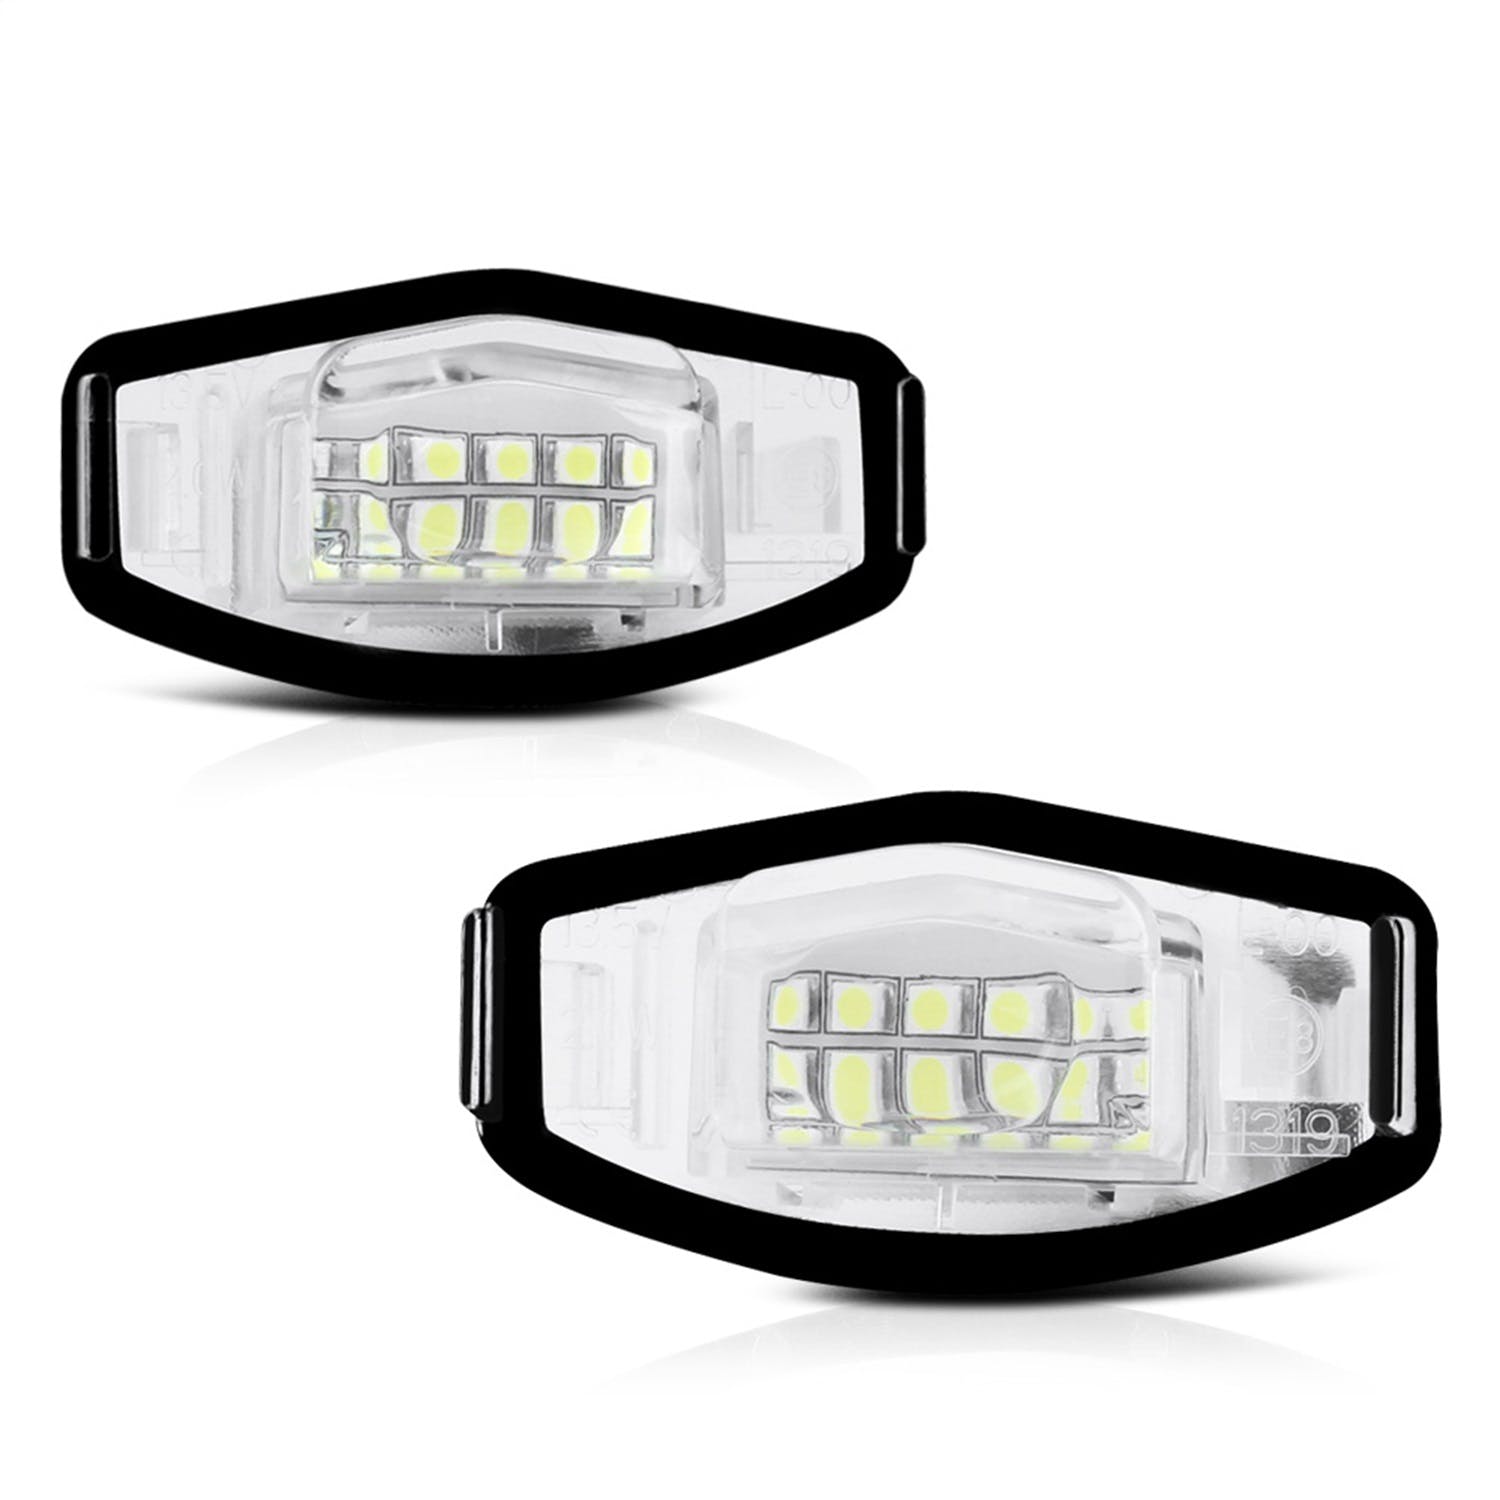 XTUNE POWER 9044991 Complete License Plate Bulb Assembly Replacement with Built In LED Chips